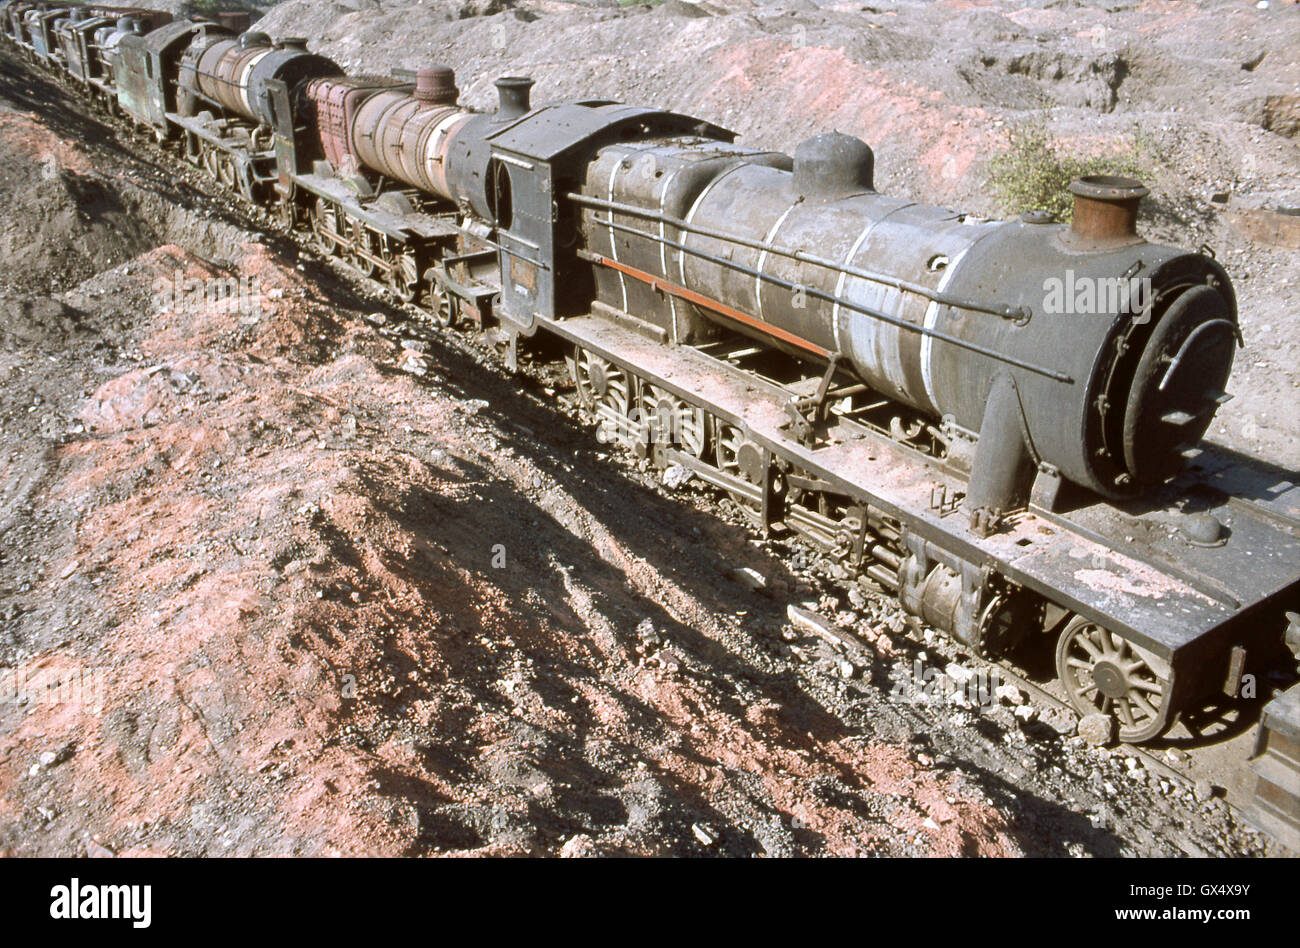 Indian Railways Standard designed 2-8-0s, 4-6-0s and 4-6-2 Pacifics awaiting cutting up. Stock Photo